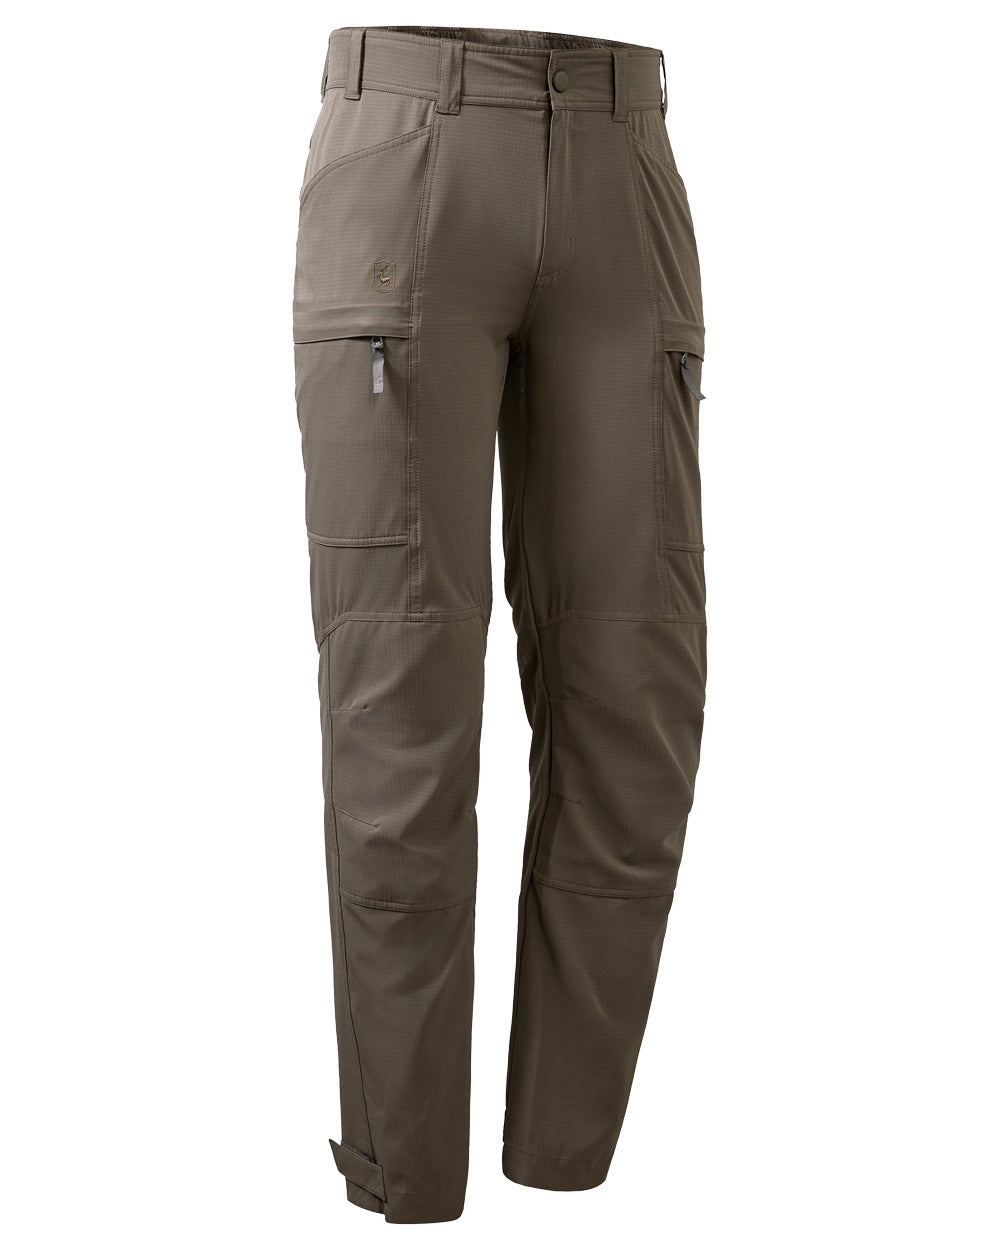 Stone Grey coloured Deerhunter Canopy Trousers on White background 